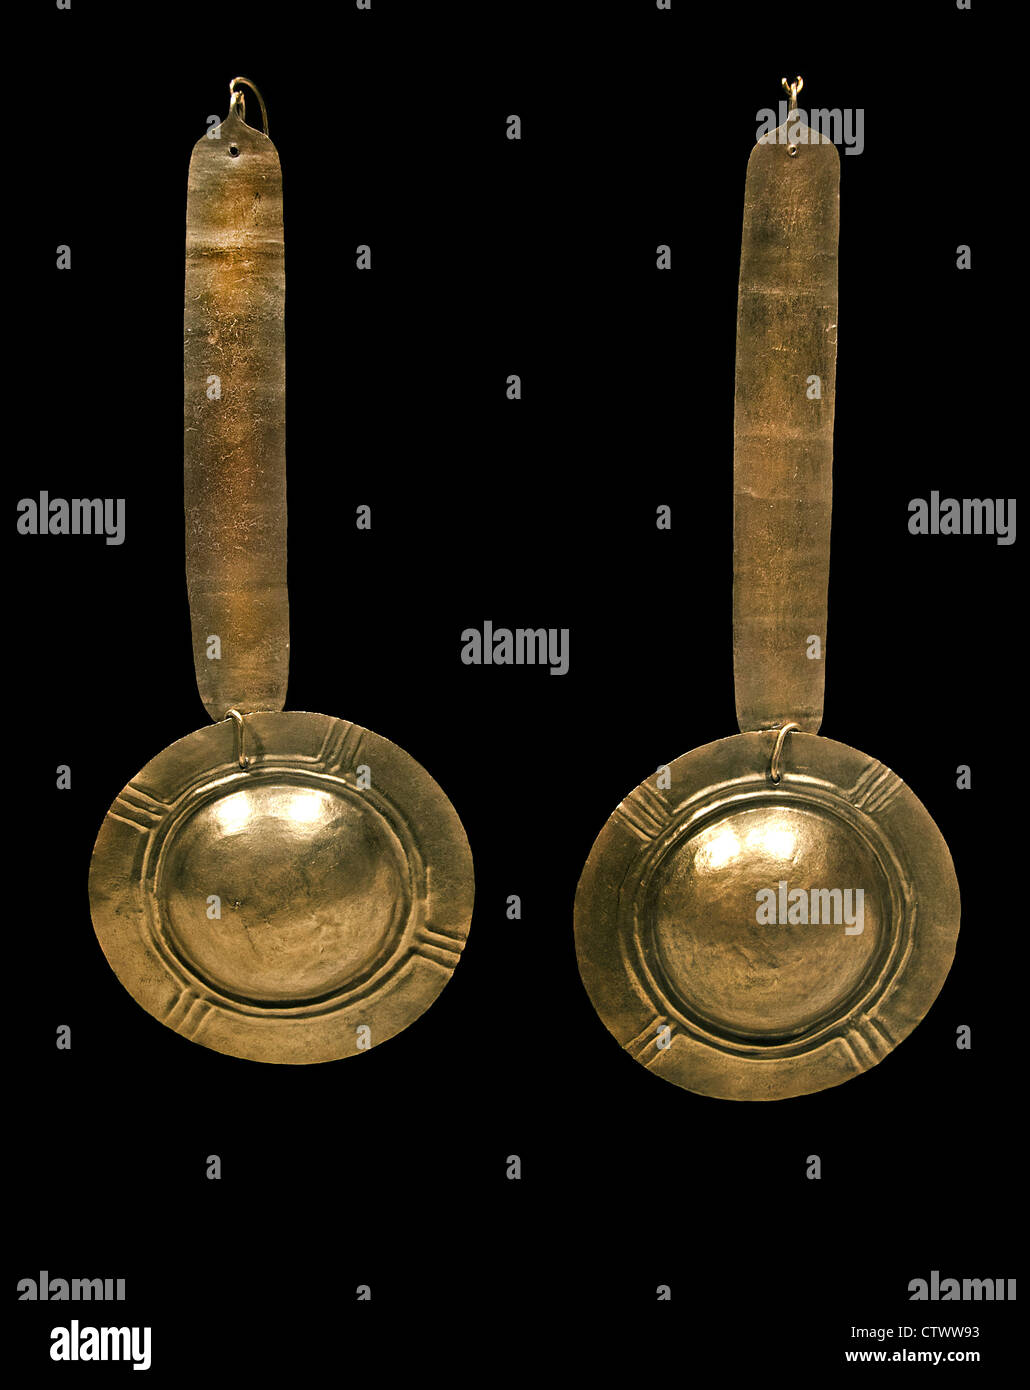 Pair of Ear Pendants 13th–16th century Colombia Culture Sonso Gold  H. 9 5/8 x Diam. 3 3/4 in. (24.4 x 9/5 cm) Colombian Stock Photo